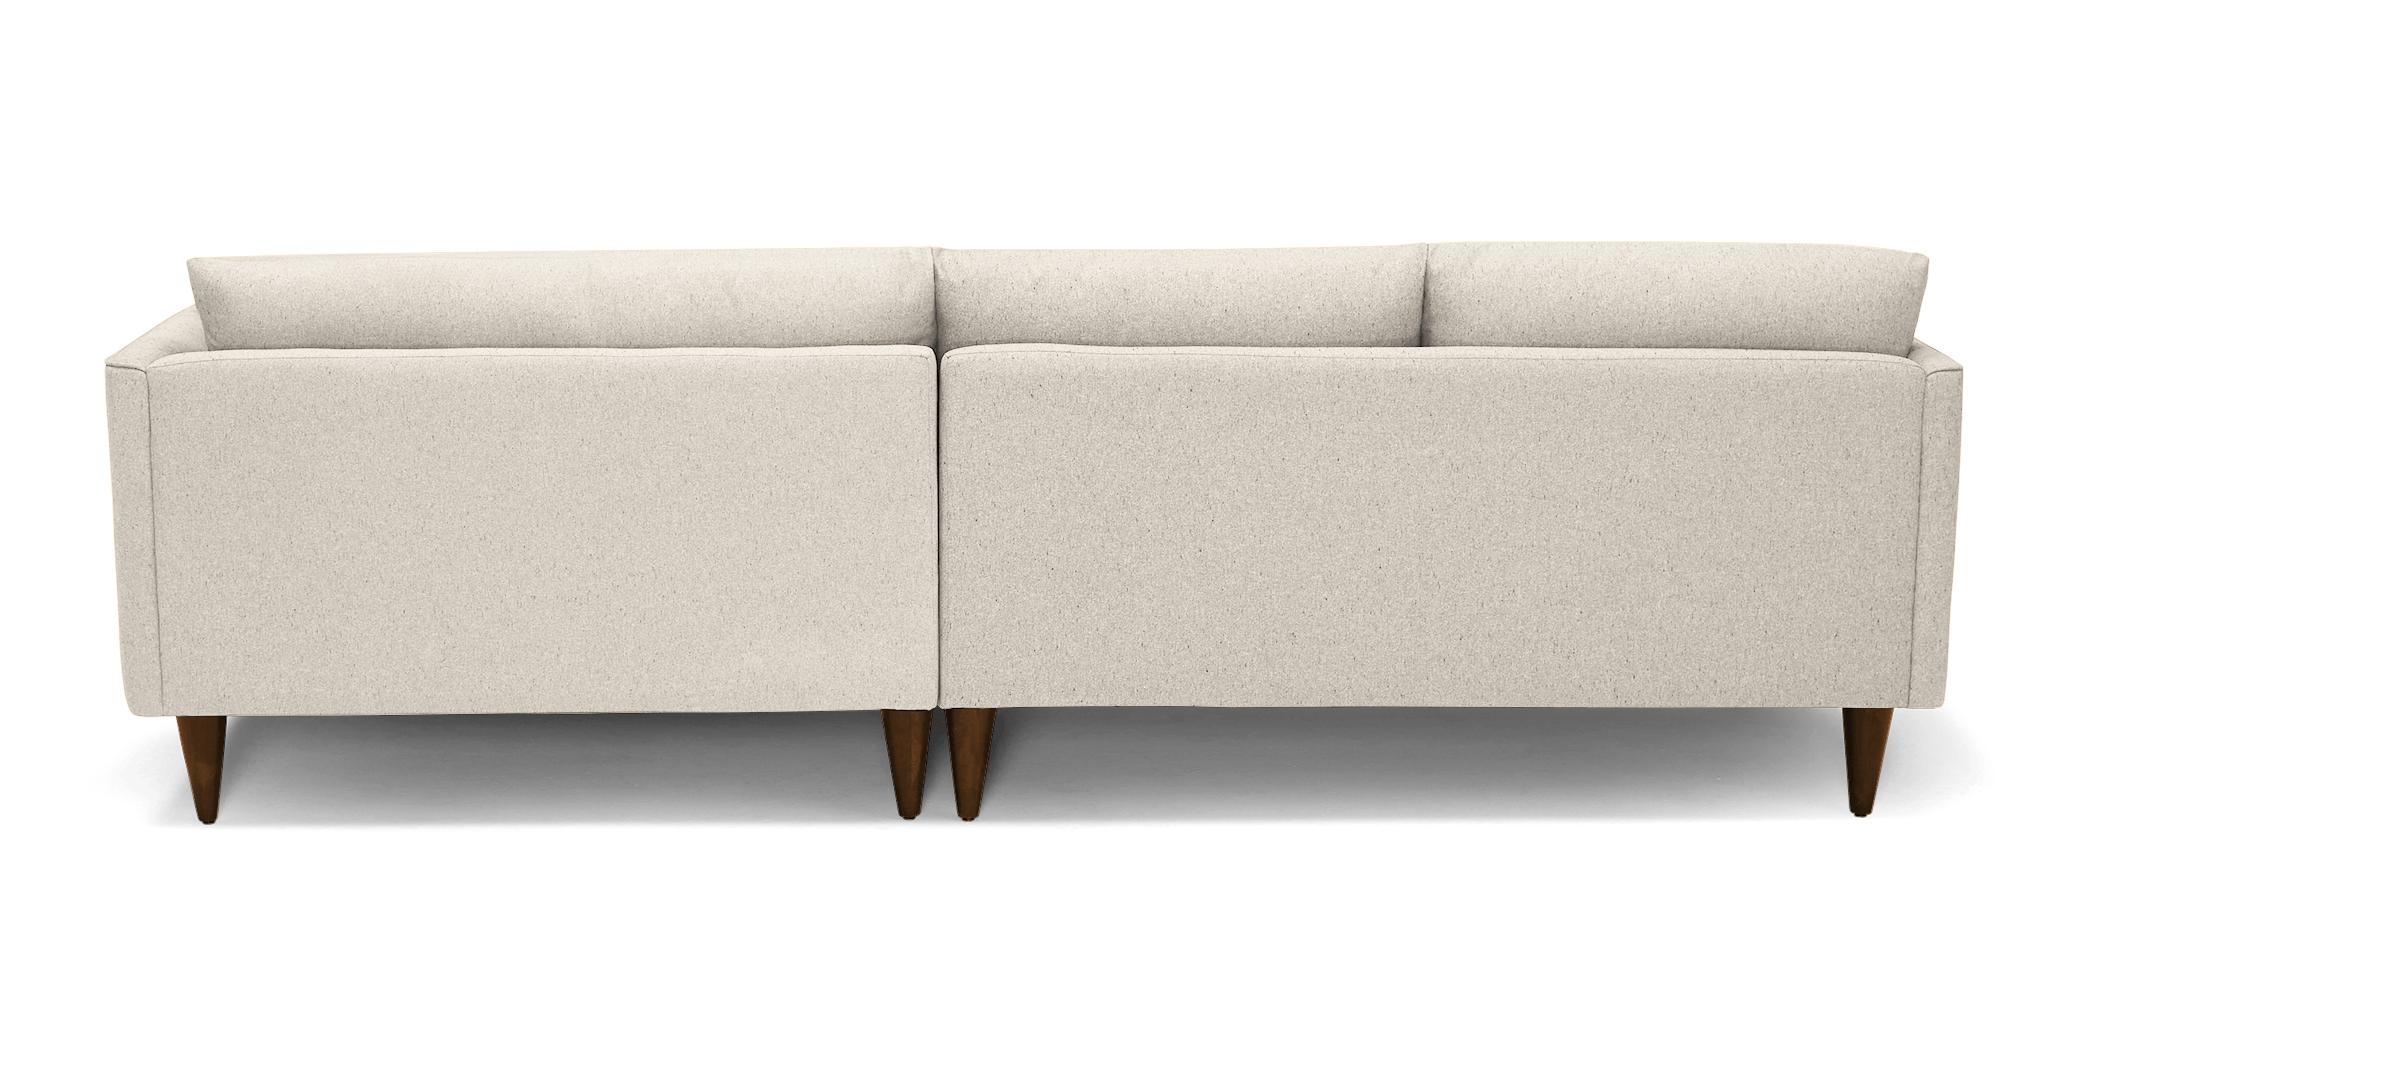 Lewis Mid Century Modern Sectional - Pet and Kid Friendly- left facing chaise - Image 4